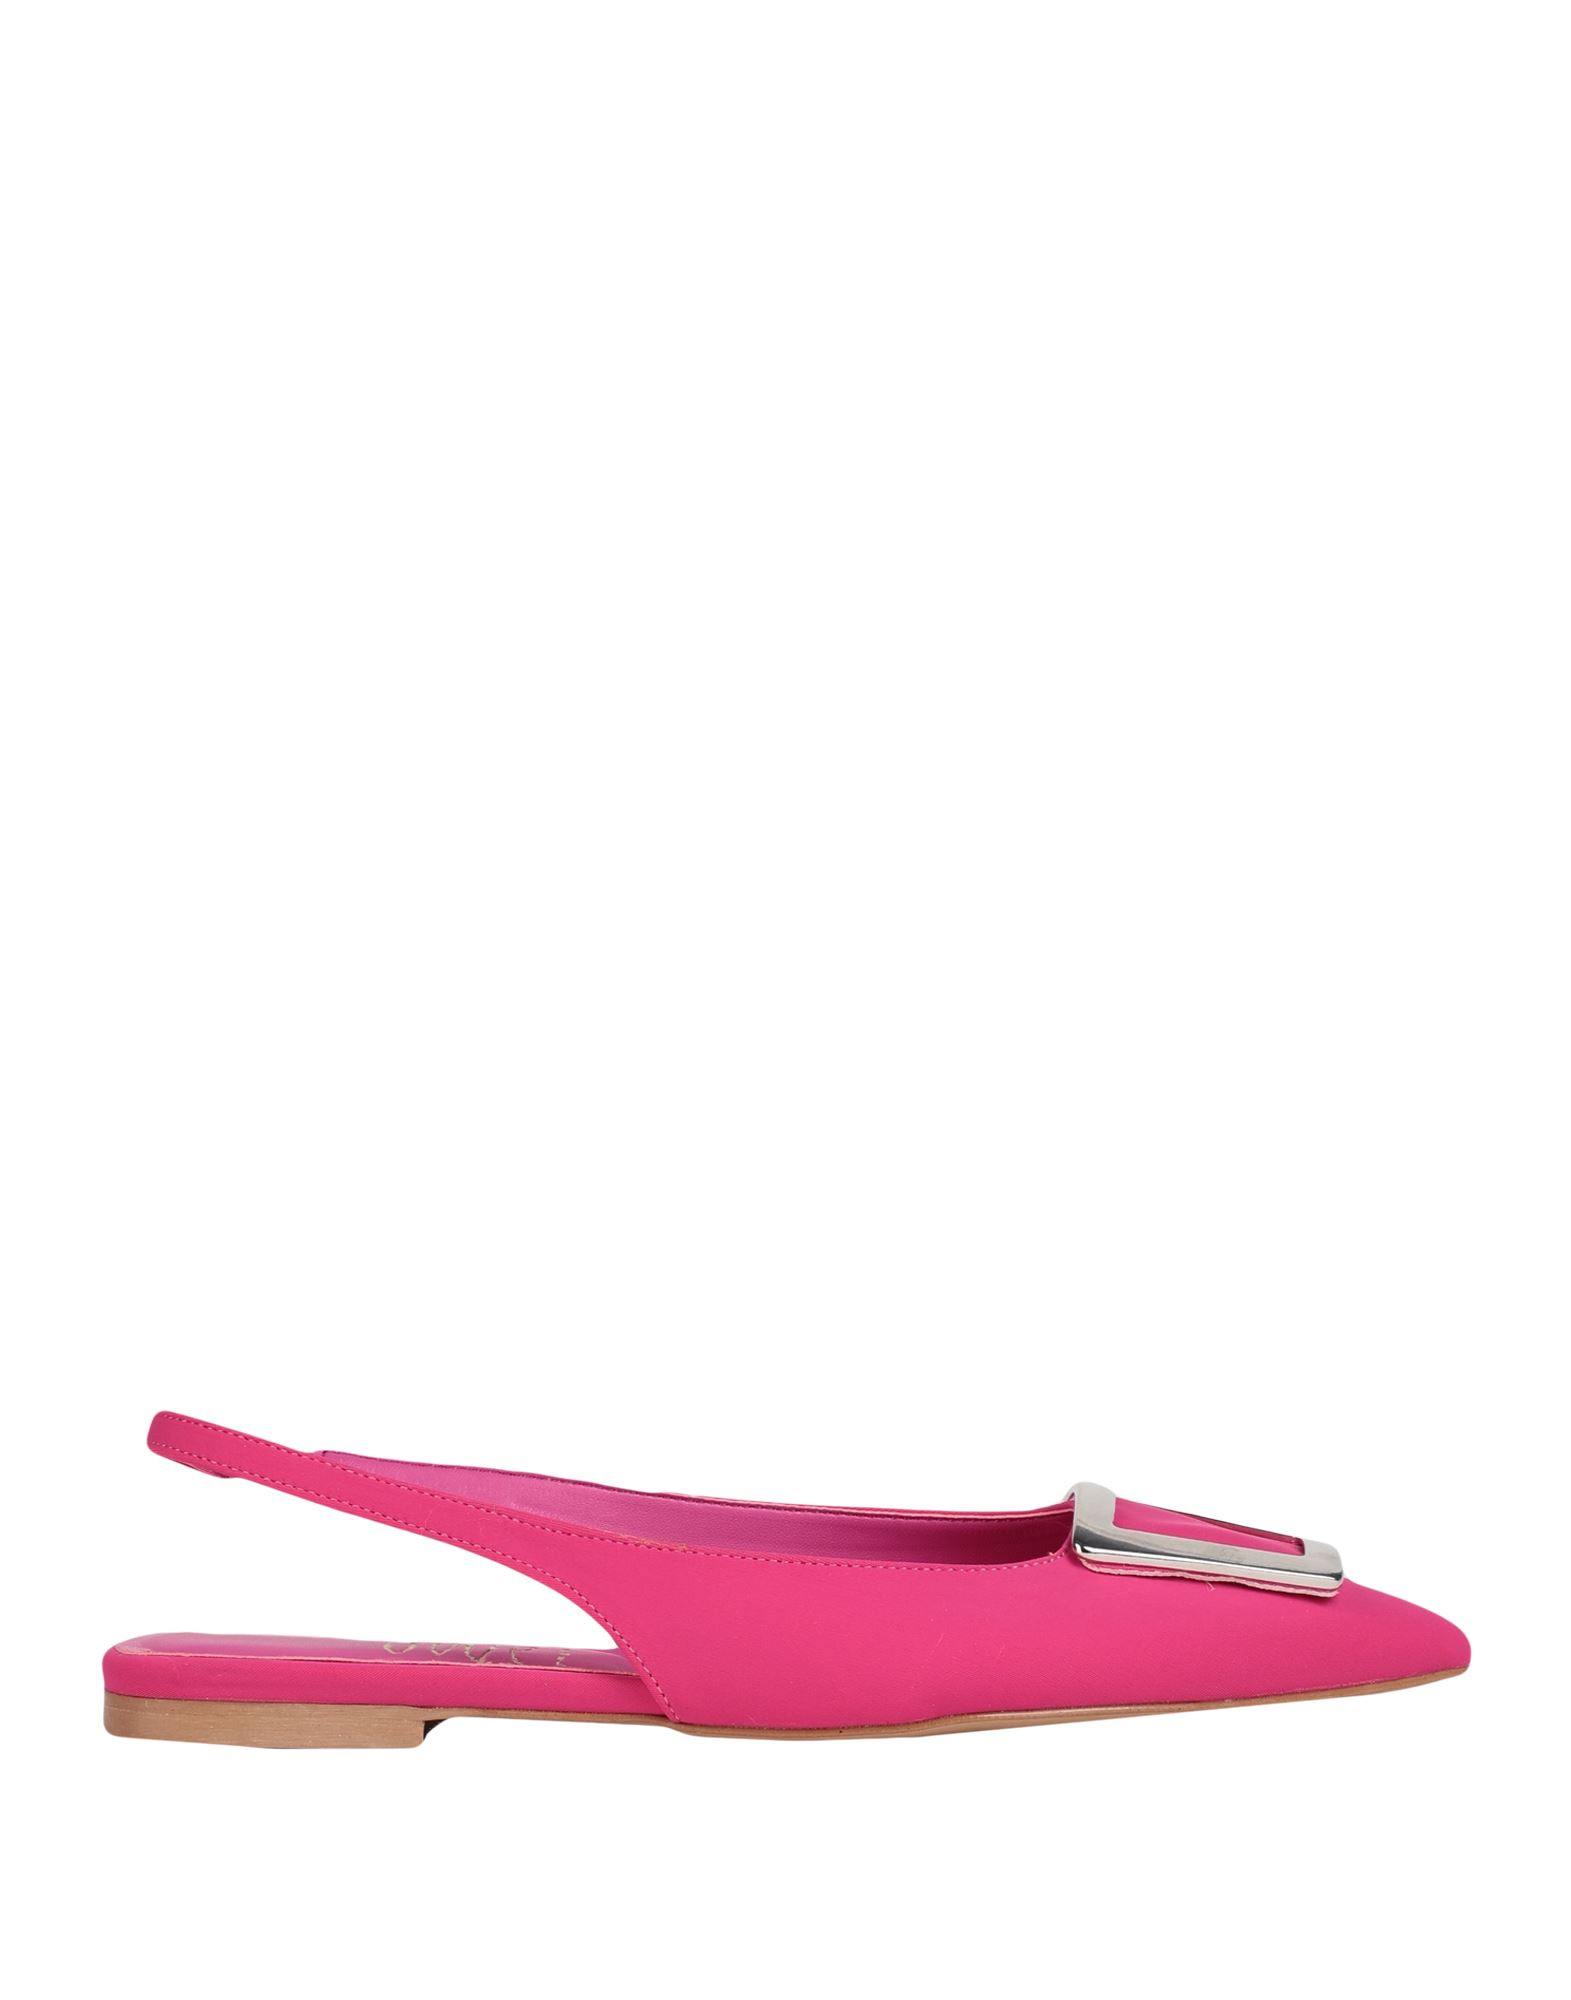 Ovye' By Cristina Lucchi Woman Ballet Flats Fuchsia Size 7 Lycra In Pink